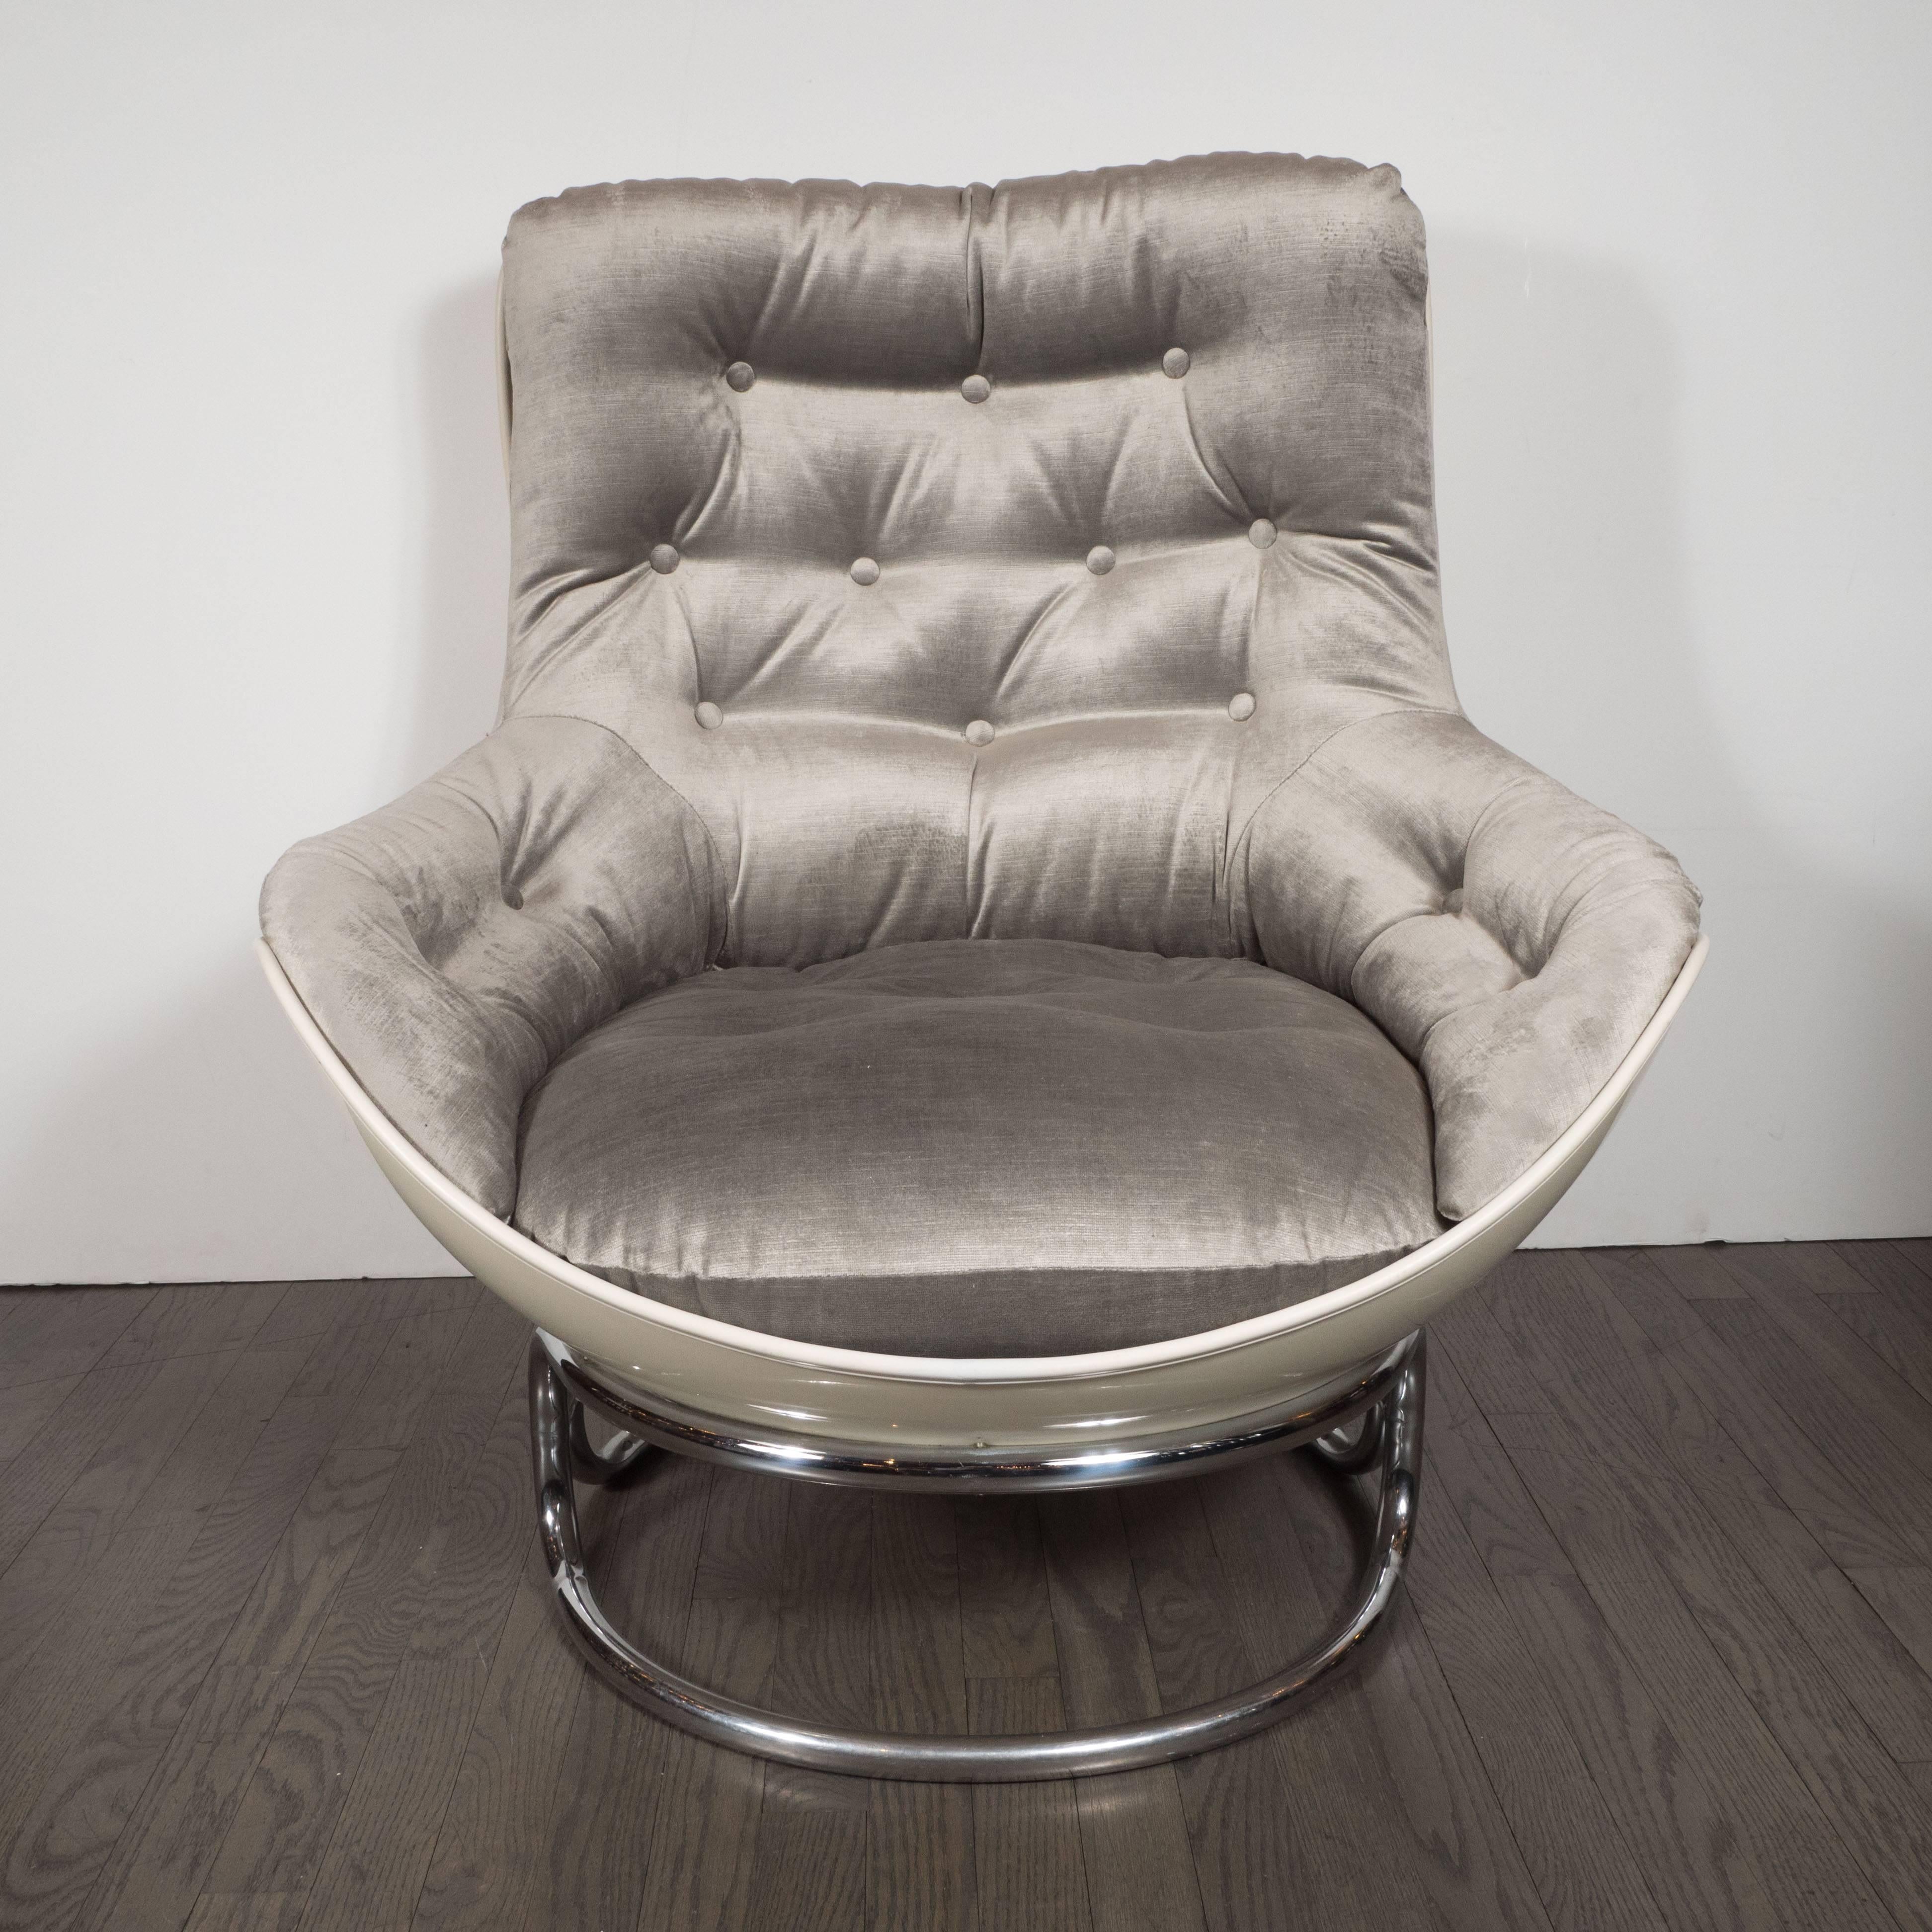 This sophisticated and dynamic pair of lounge chairs was produced by the esteemed French maker Airborne, circa 1970. They feature button back upholstery on every facet of the chair surrounded by lustrous white fiberglass surrounds with piping in the